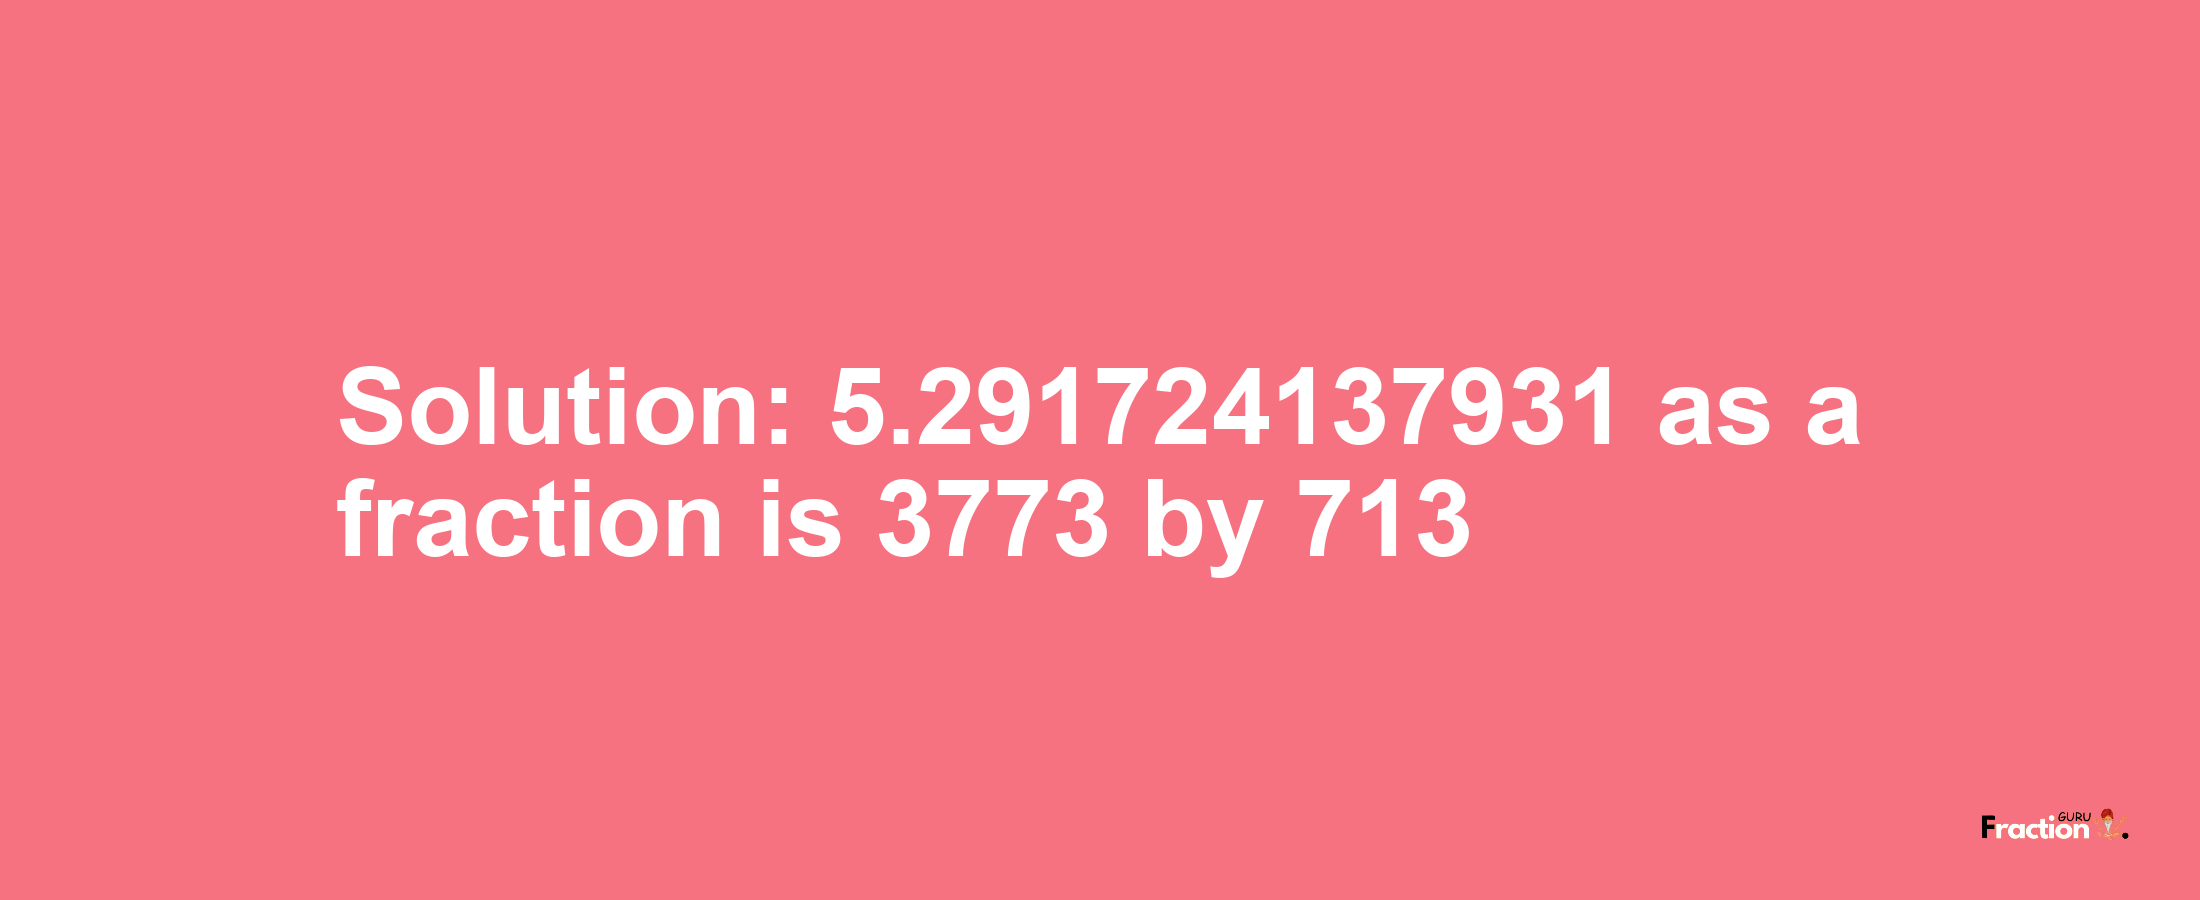 Solution:5.291724137931 as a fraction is 3773/713